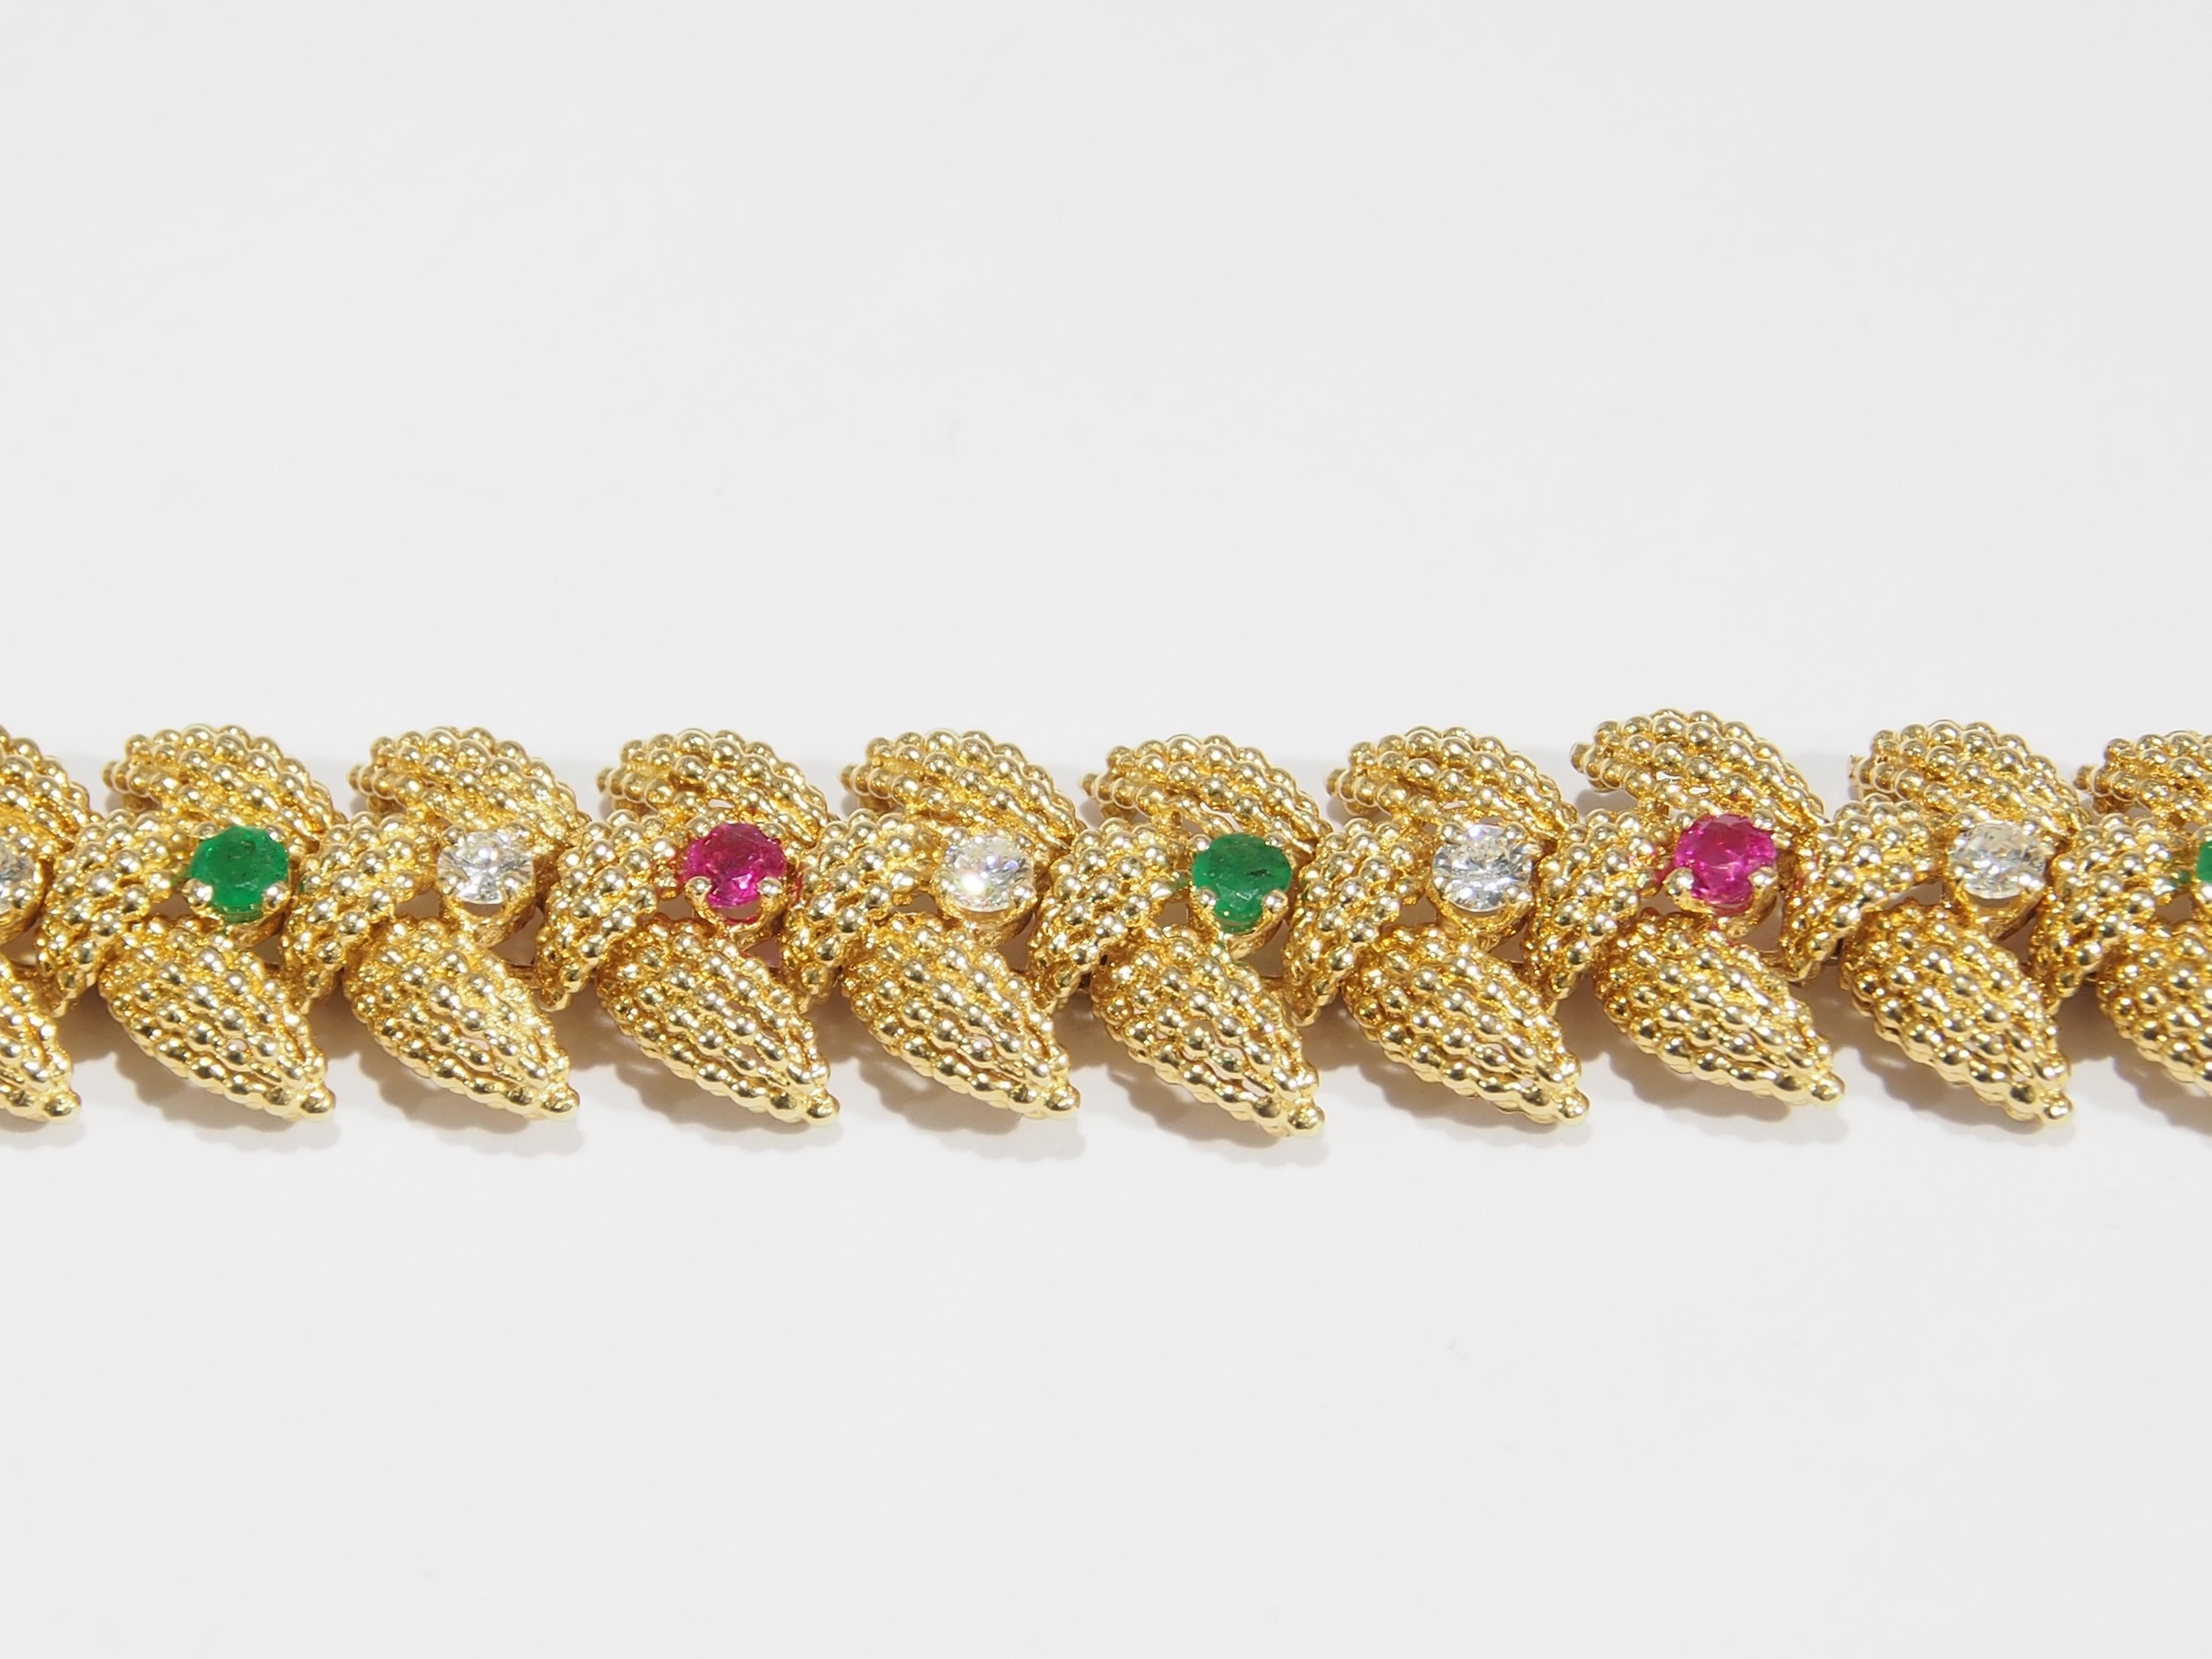 From the iconic jewelry designer, Tiffany & Co. is this stunning Vintage 18K Yellow Gold Link Bracelet. Fabricated with interlocking reticulated Leaves that are accented with alternating Diamonds, Rubies and Emeralds to create a stunning heirloom